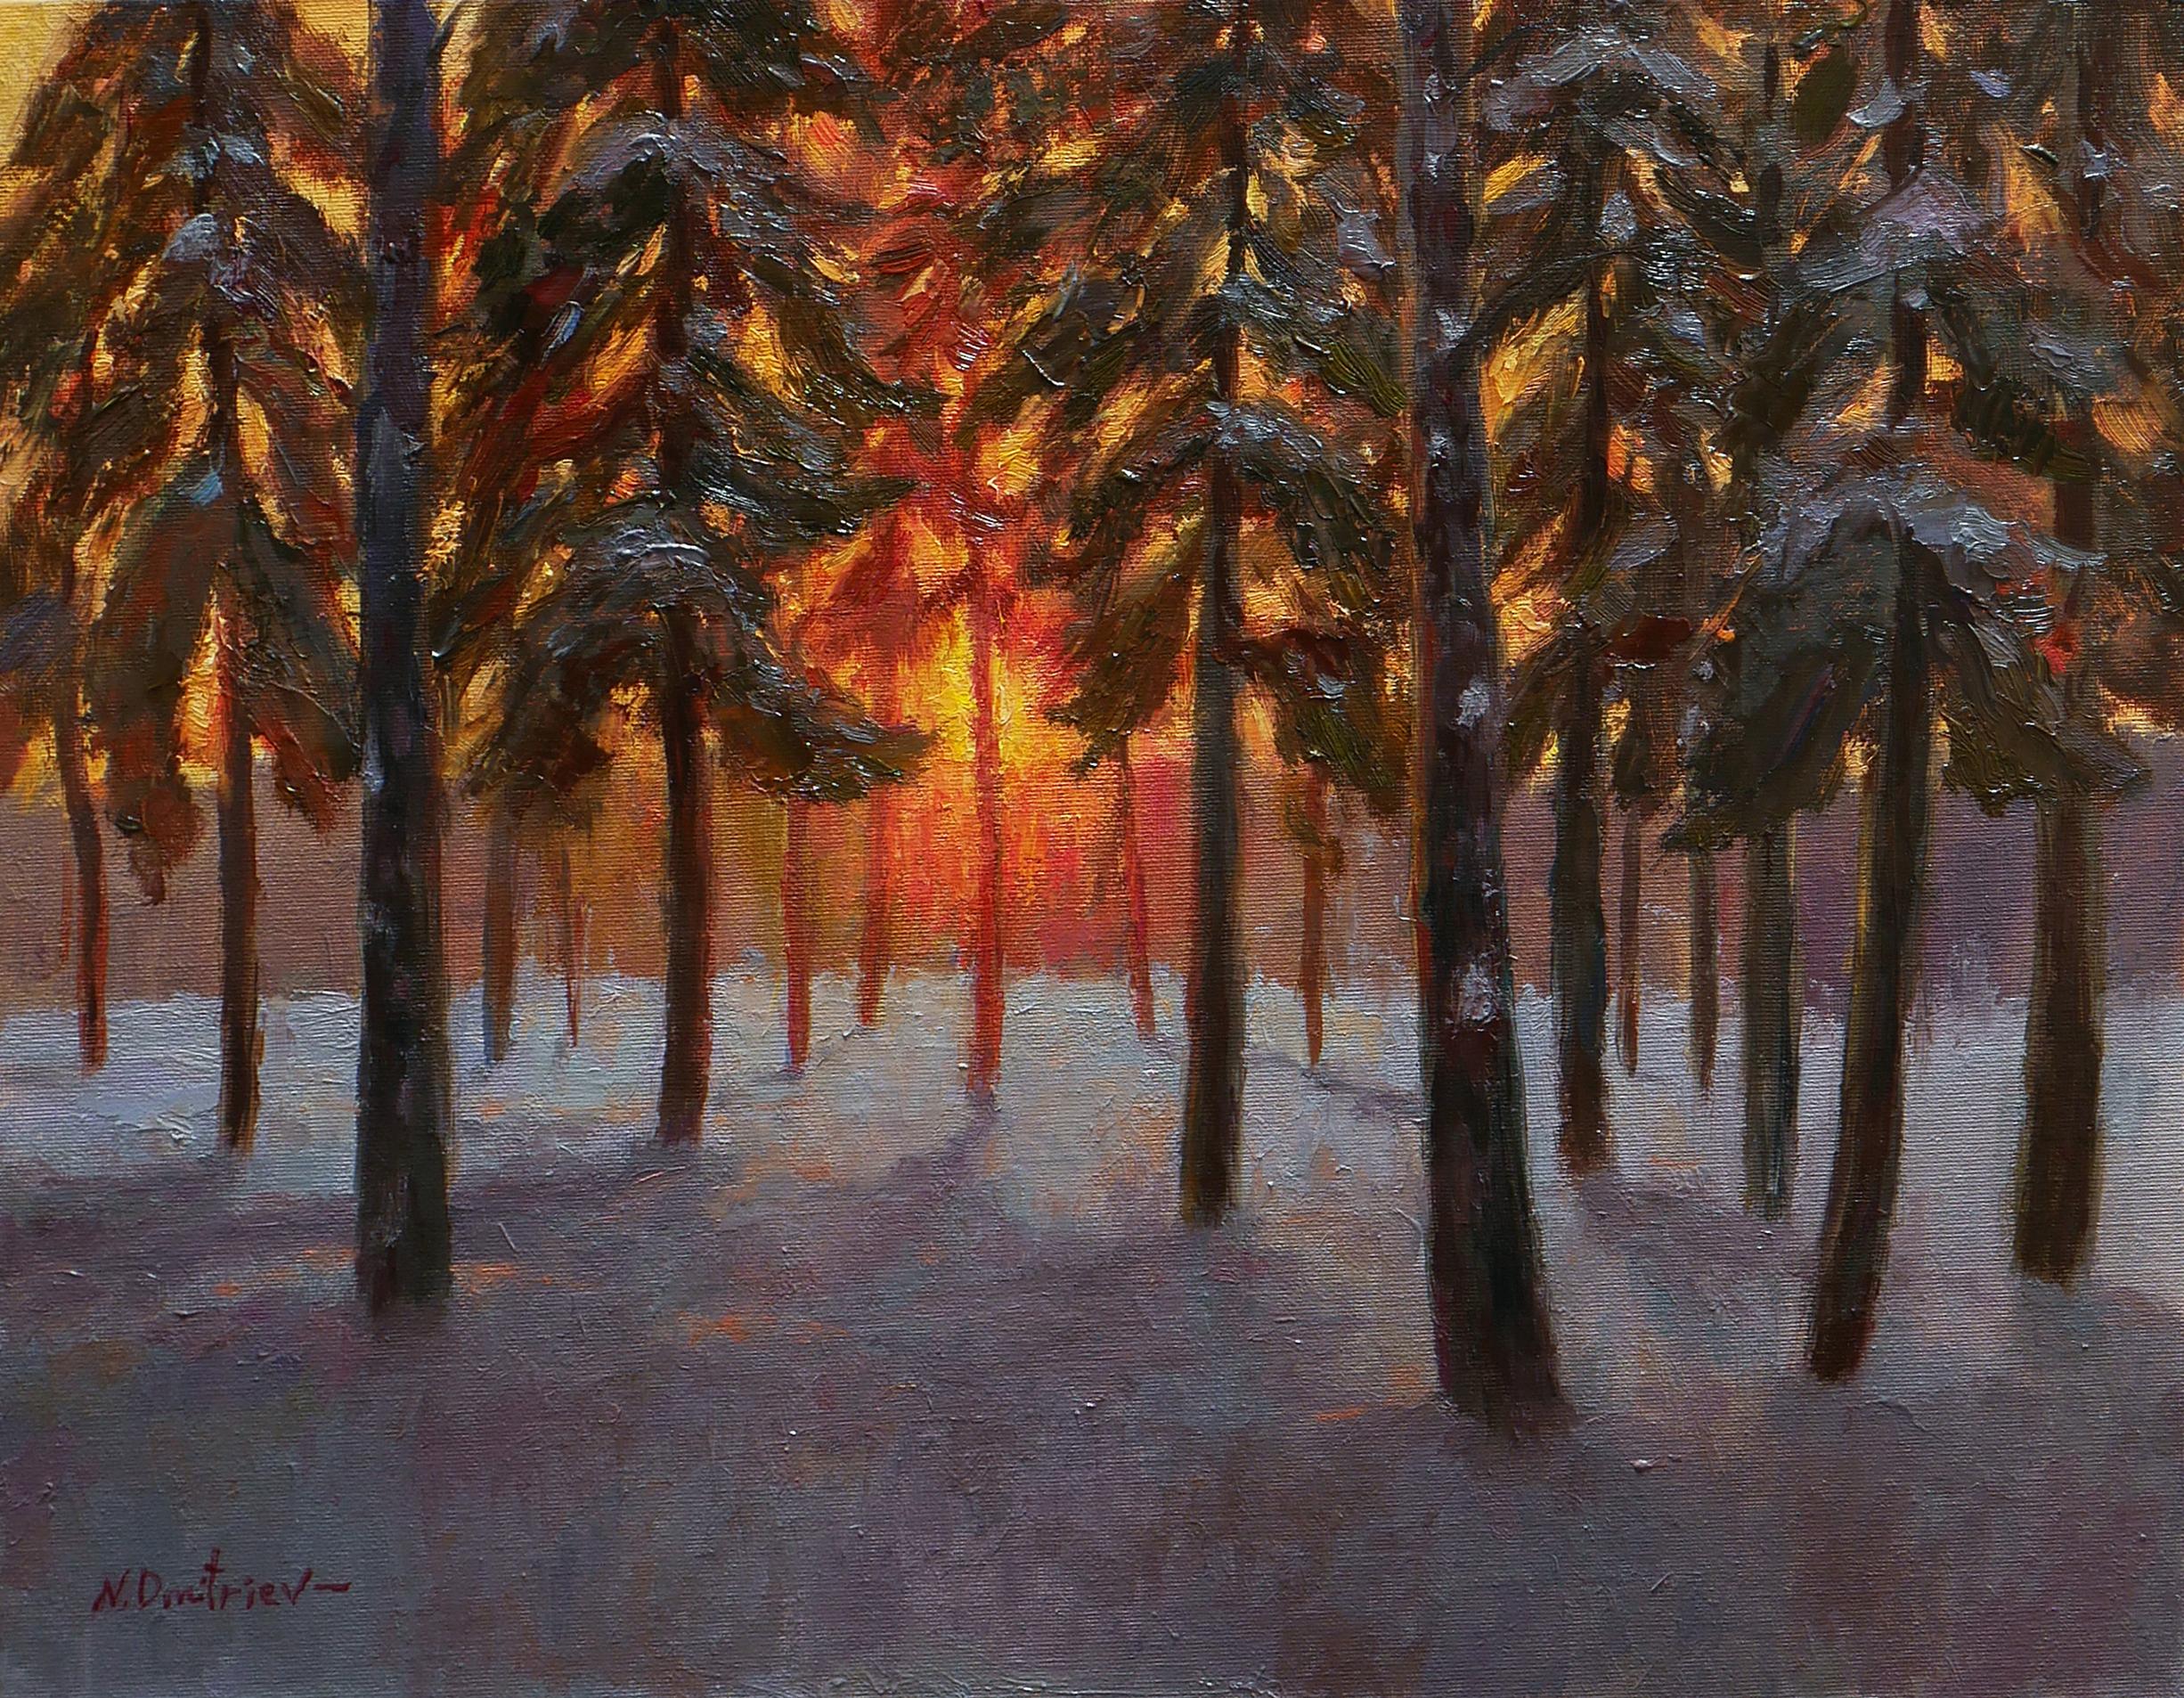 "The winter impressionist painting with the forest and the setting Sun is a beautiful wall decor piece. The bright painting is full of different colors, and the artist professionally captures combinations of warm and cold shades. This lively